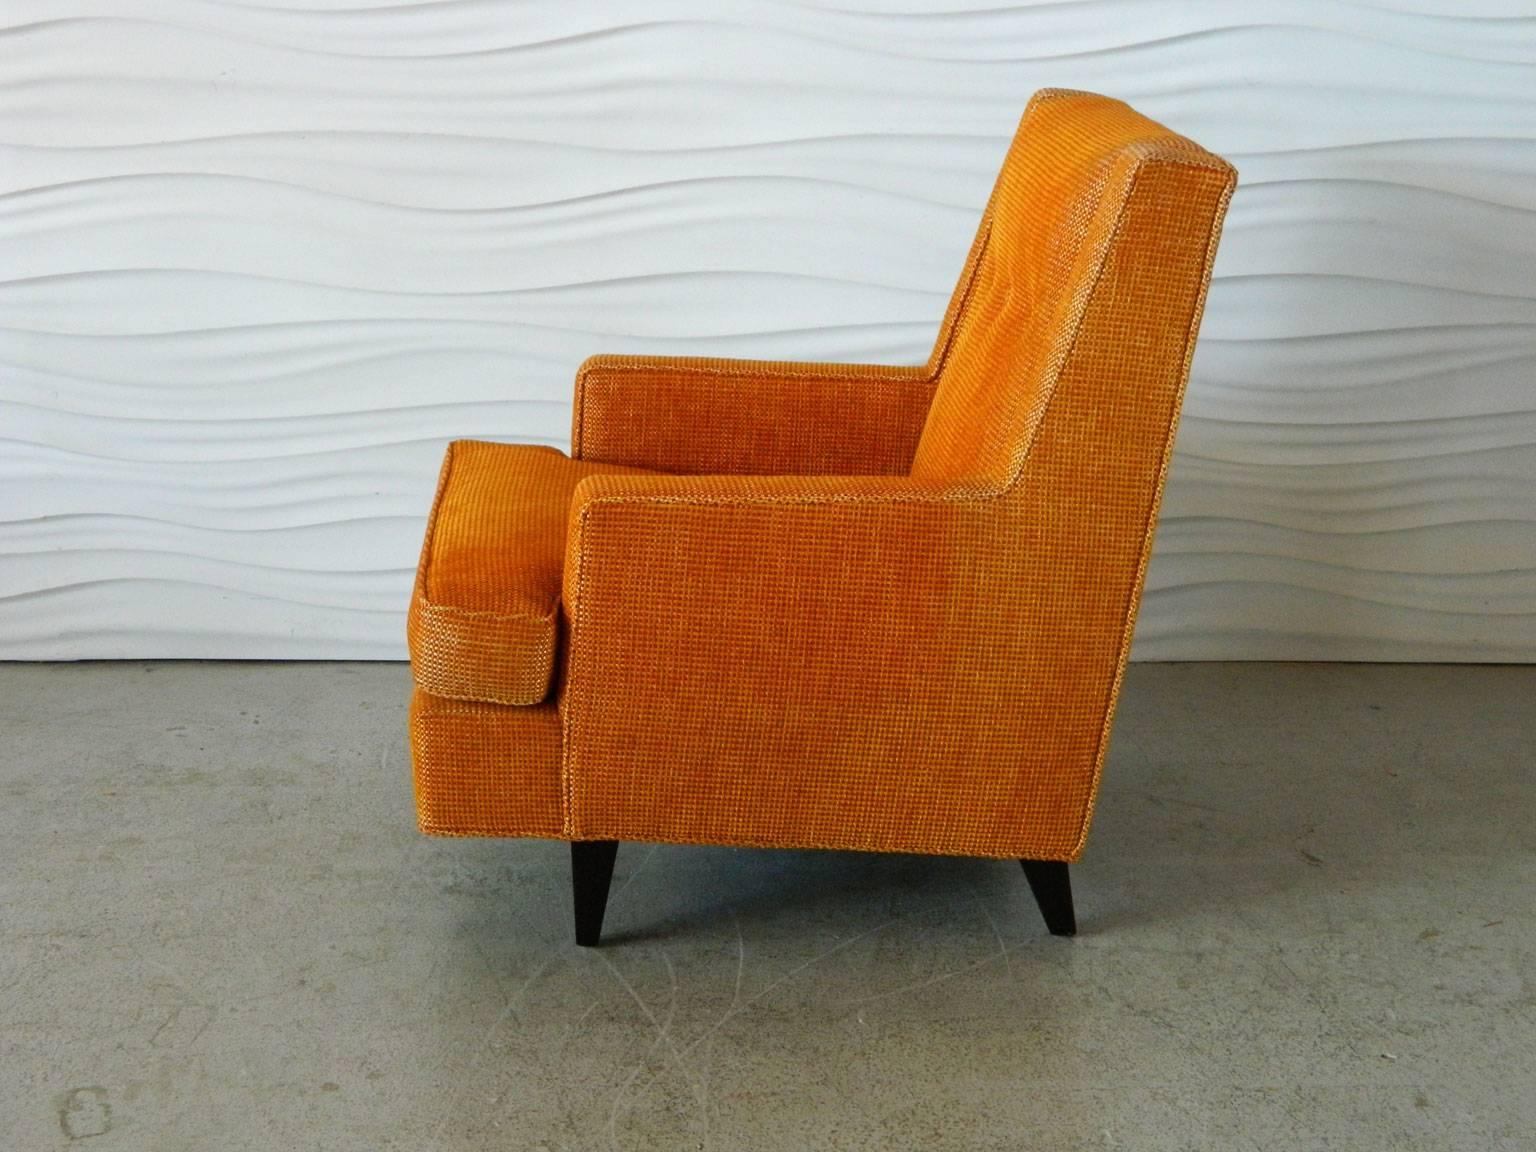 Designed by Edward Wormley in the 1950s for Dunbar Furniture, the Tall Man Lounger was prominently featured in Leslie Pina's book, Dunbar: Fine Furniture of the 1950s.